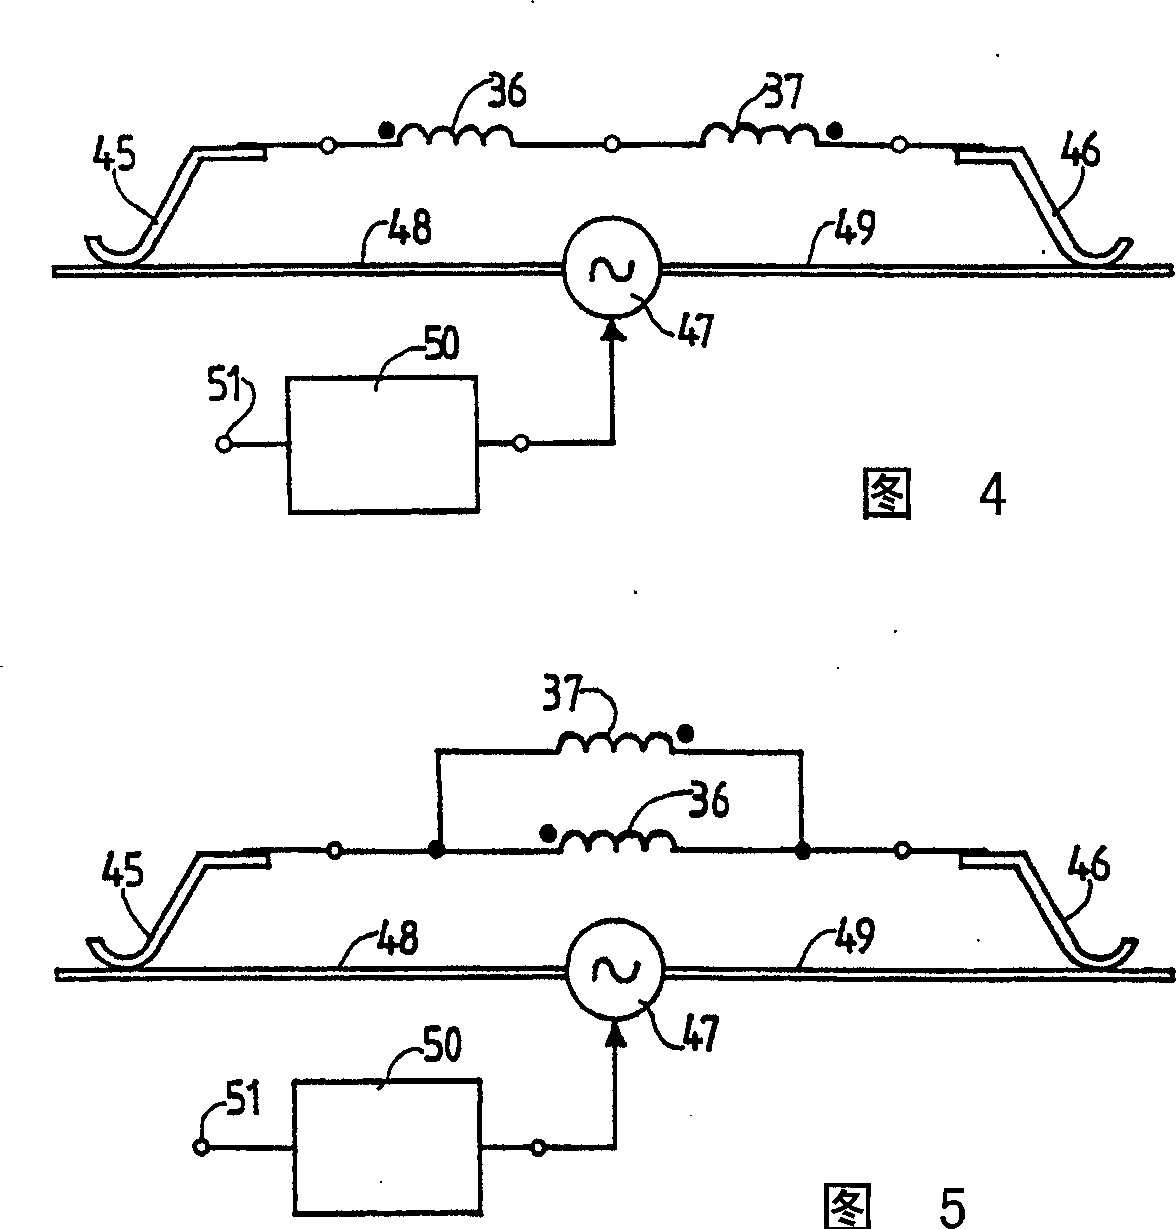 Apparatus having an electroacoustic transducer forming sound reproducing means and part of vibration generating means